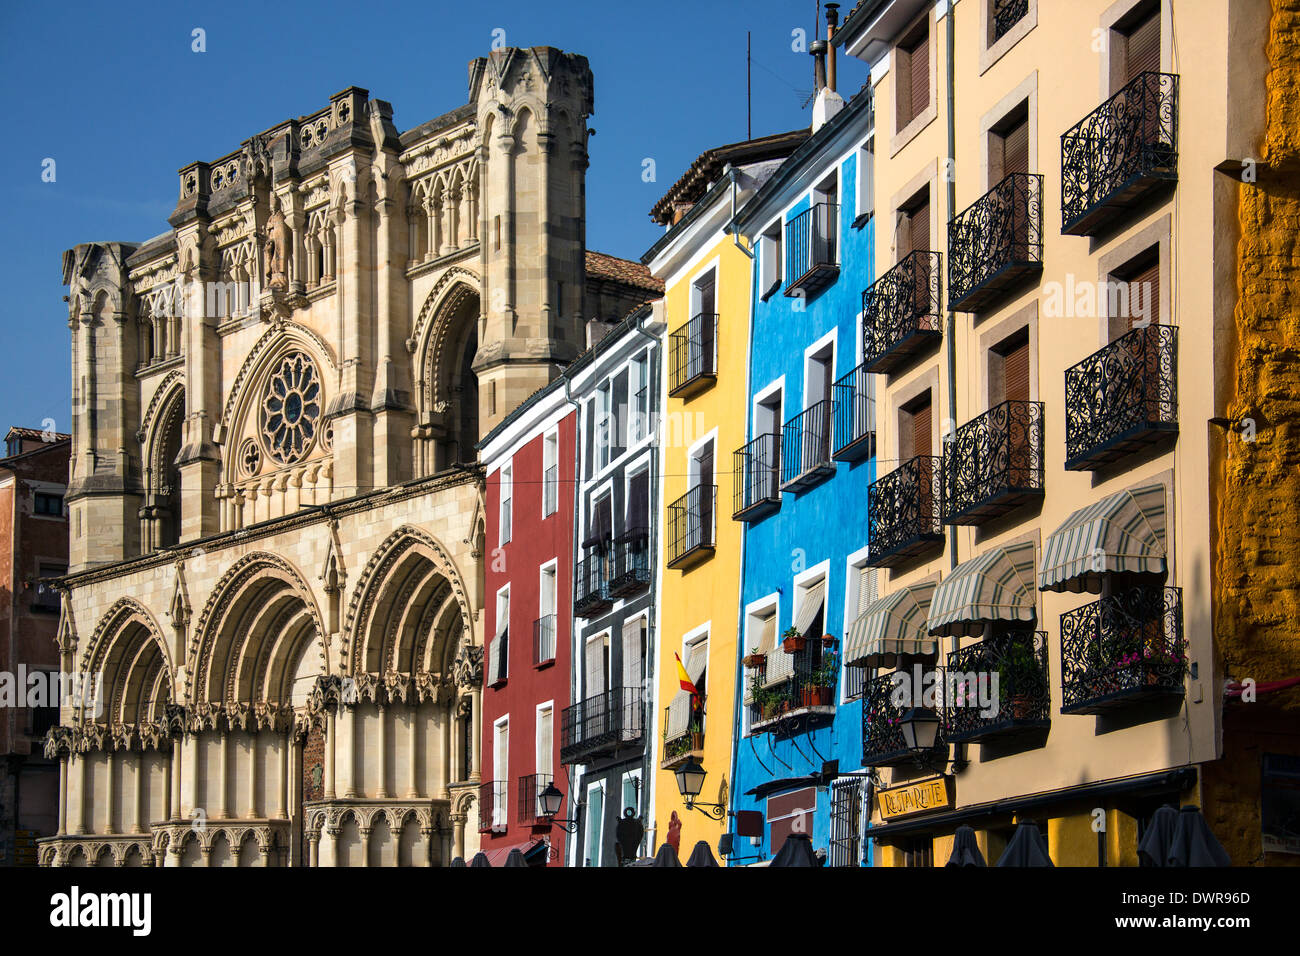 The Cathedral in Plaza Major in the city of Cuenca in the La Mancha region of central Spain. Stock Photo